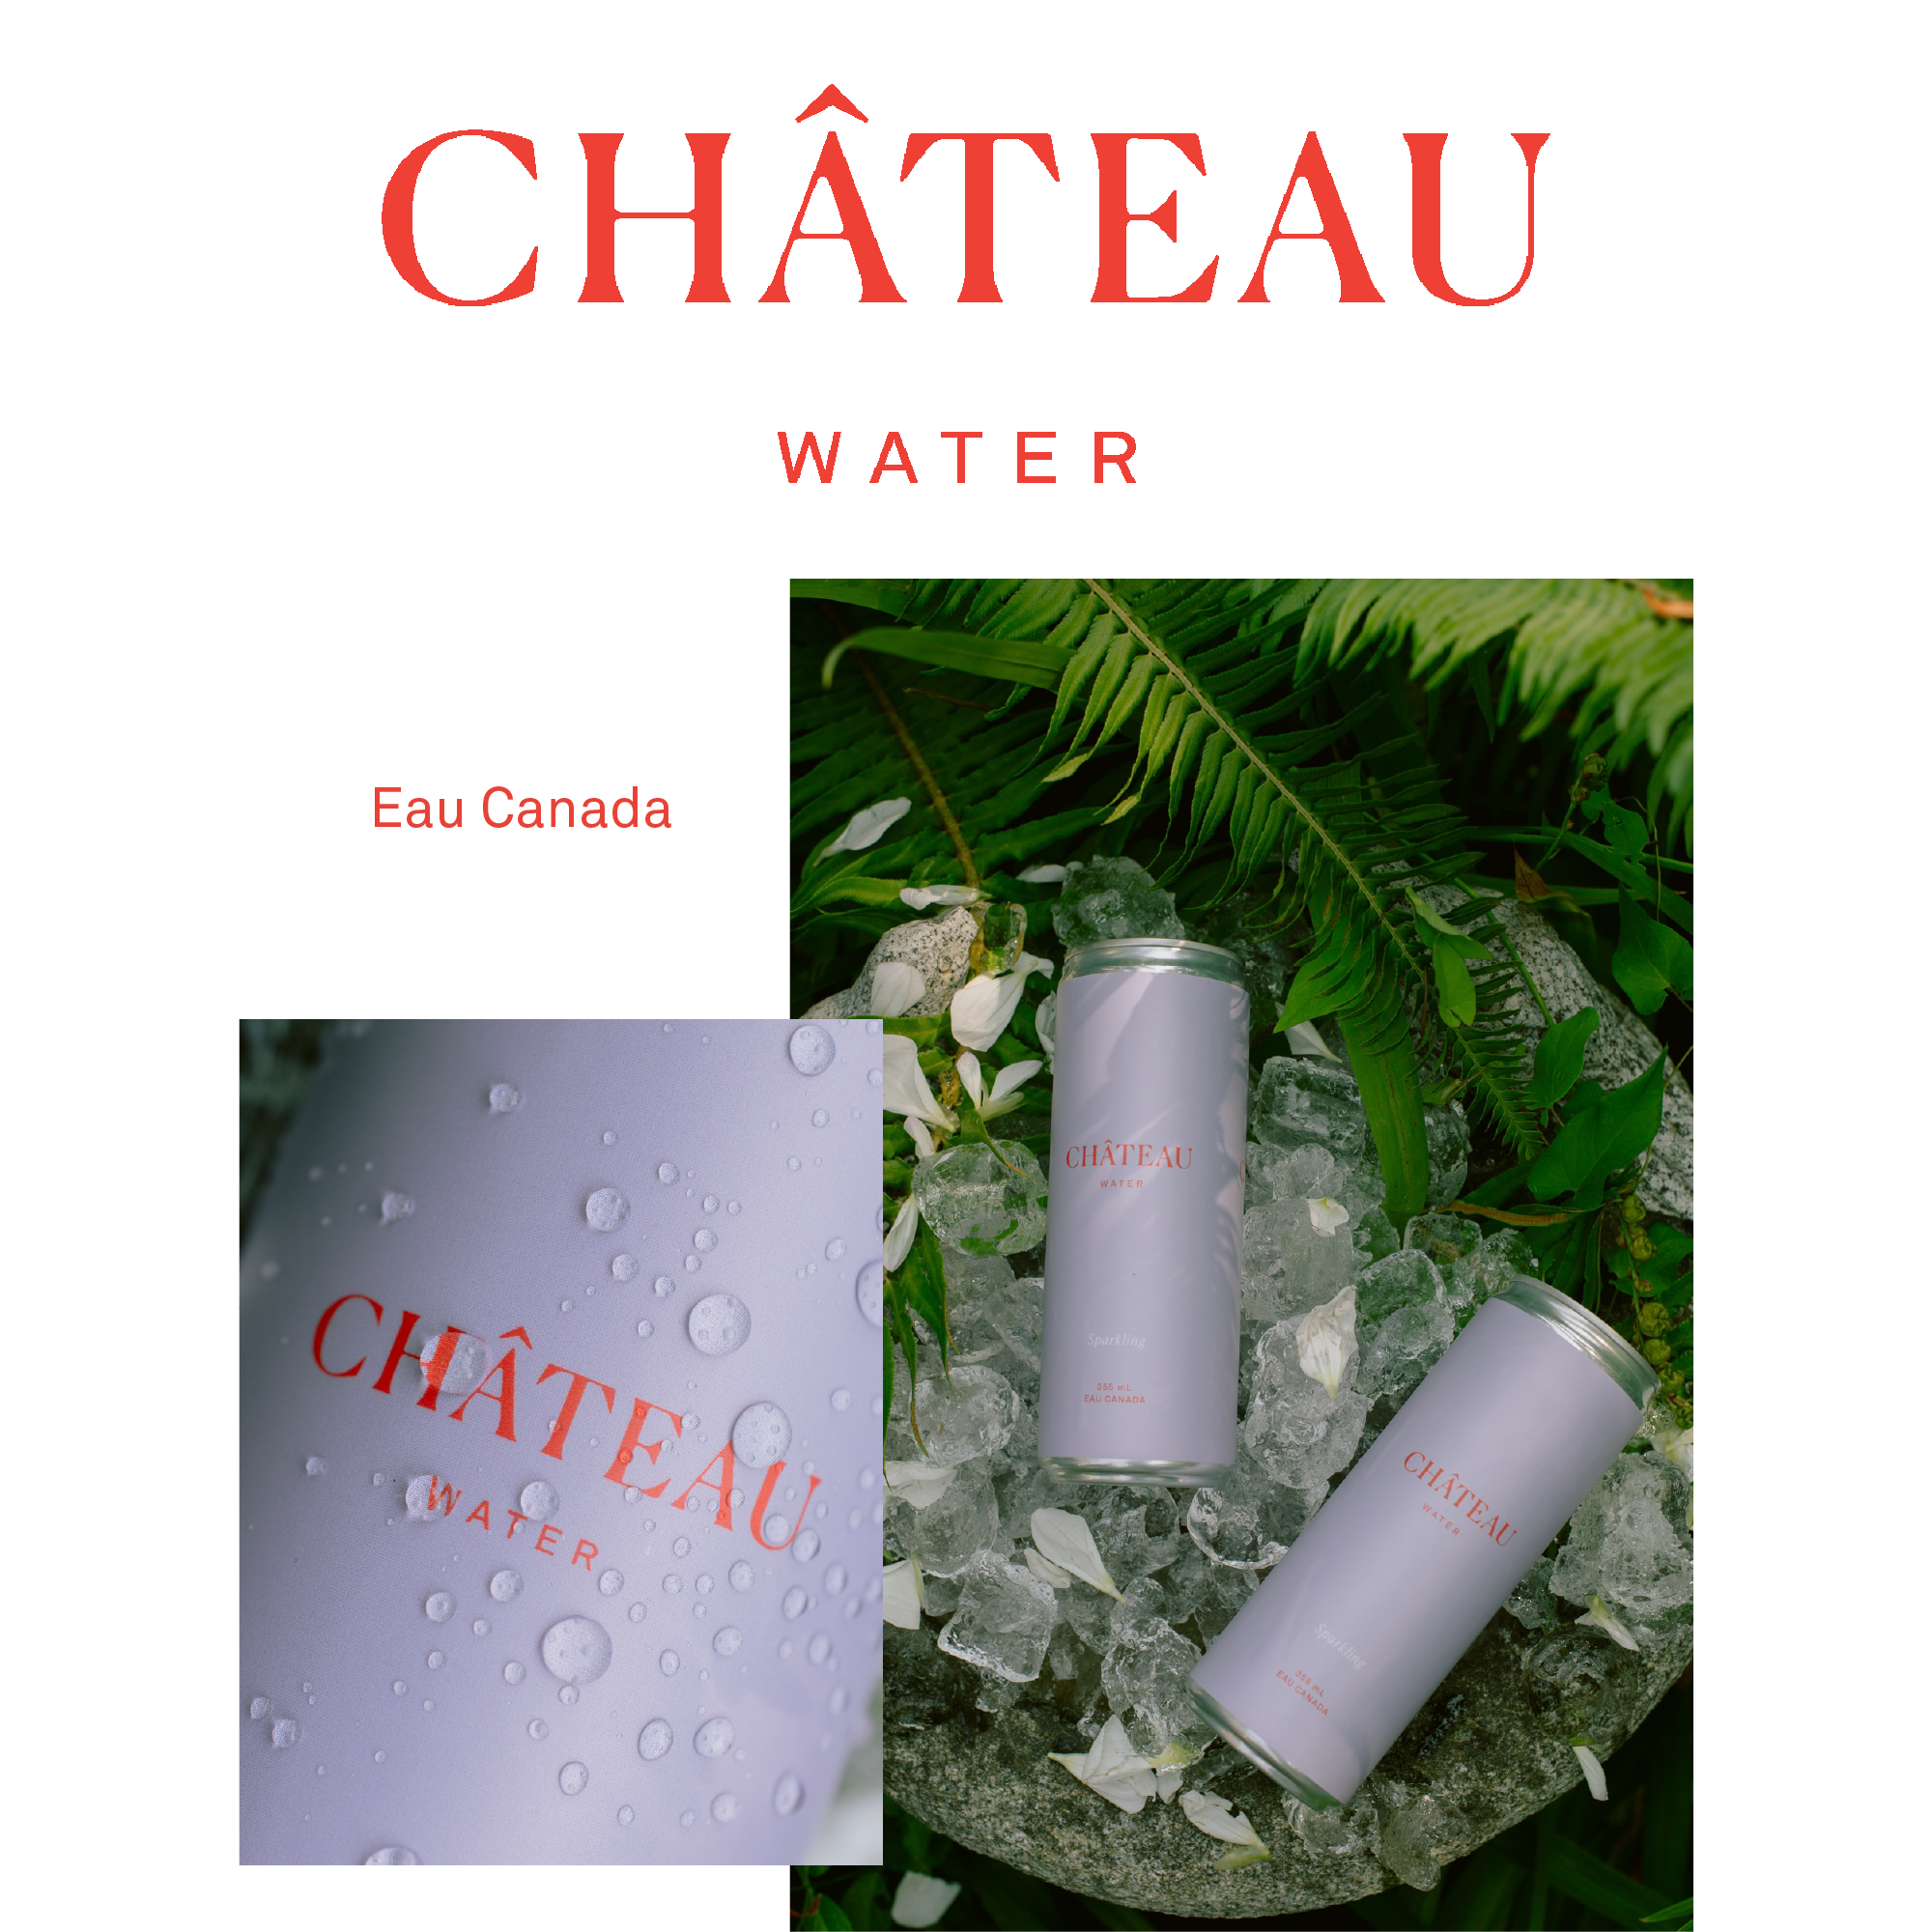 CHATEAU WATER